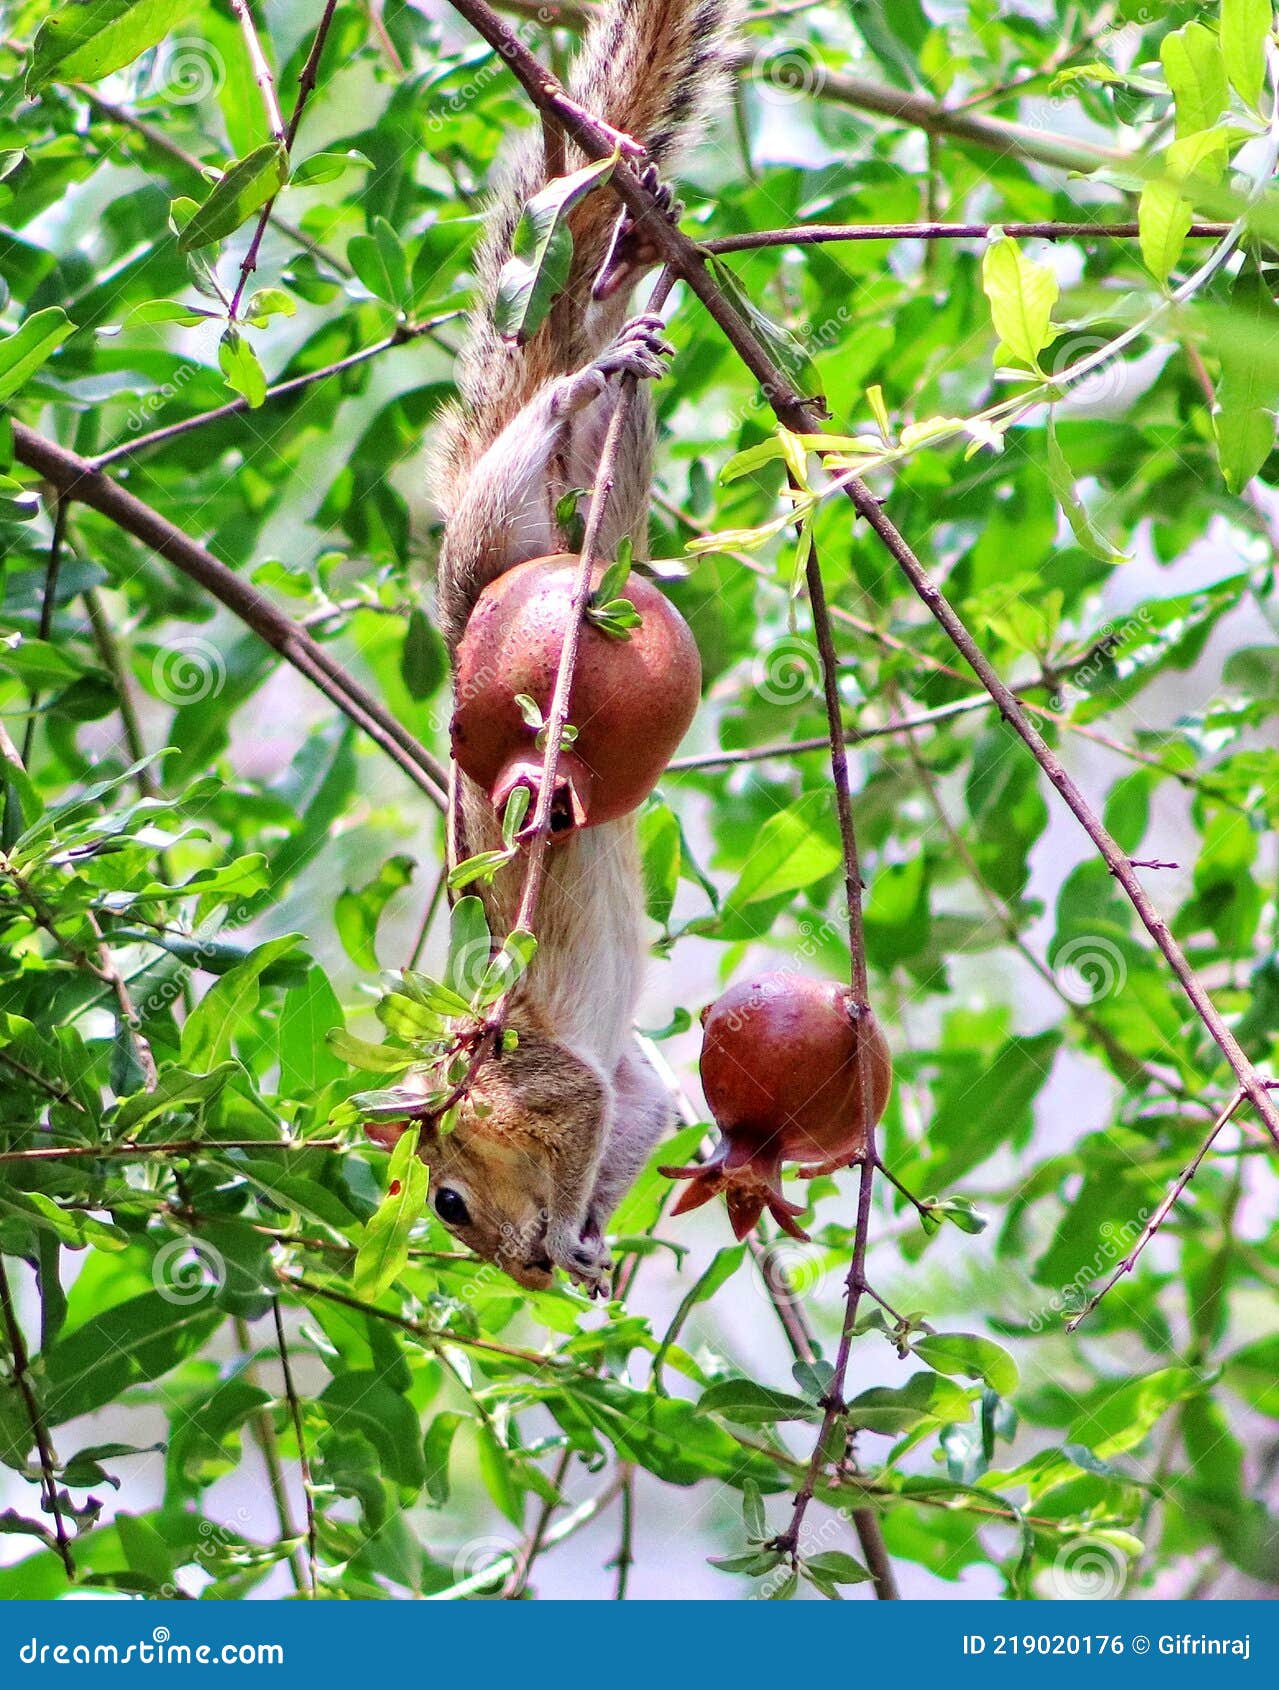 Albums 101+ Images squirrel mon eating pomegranate looks so cute Full HD, 2k, 4k